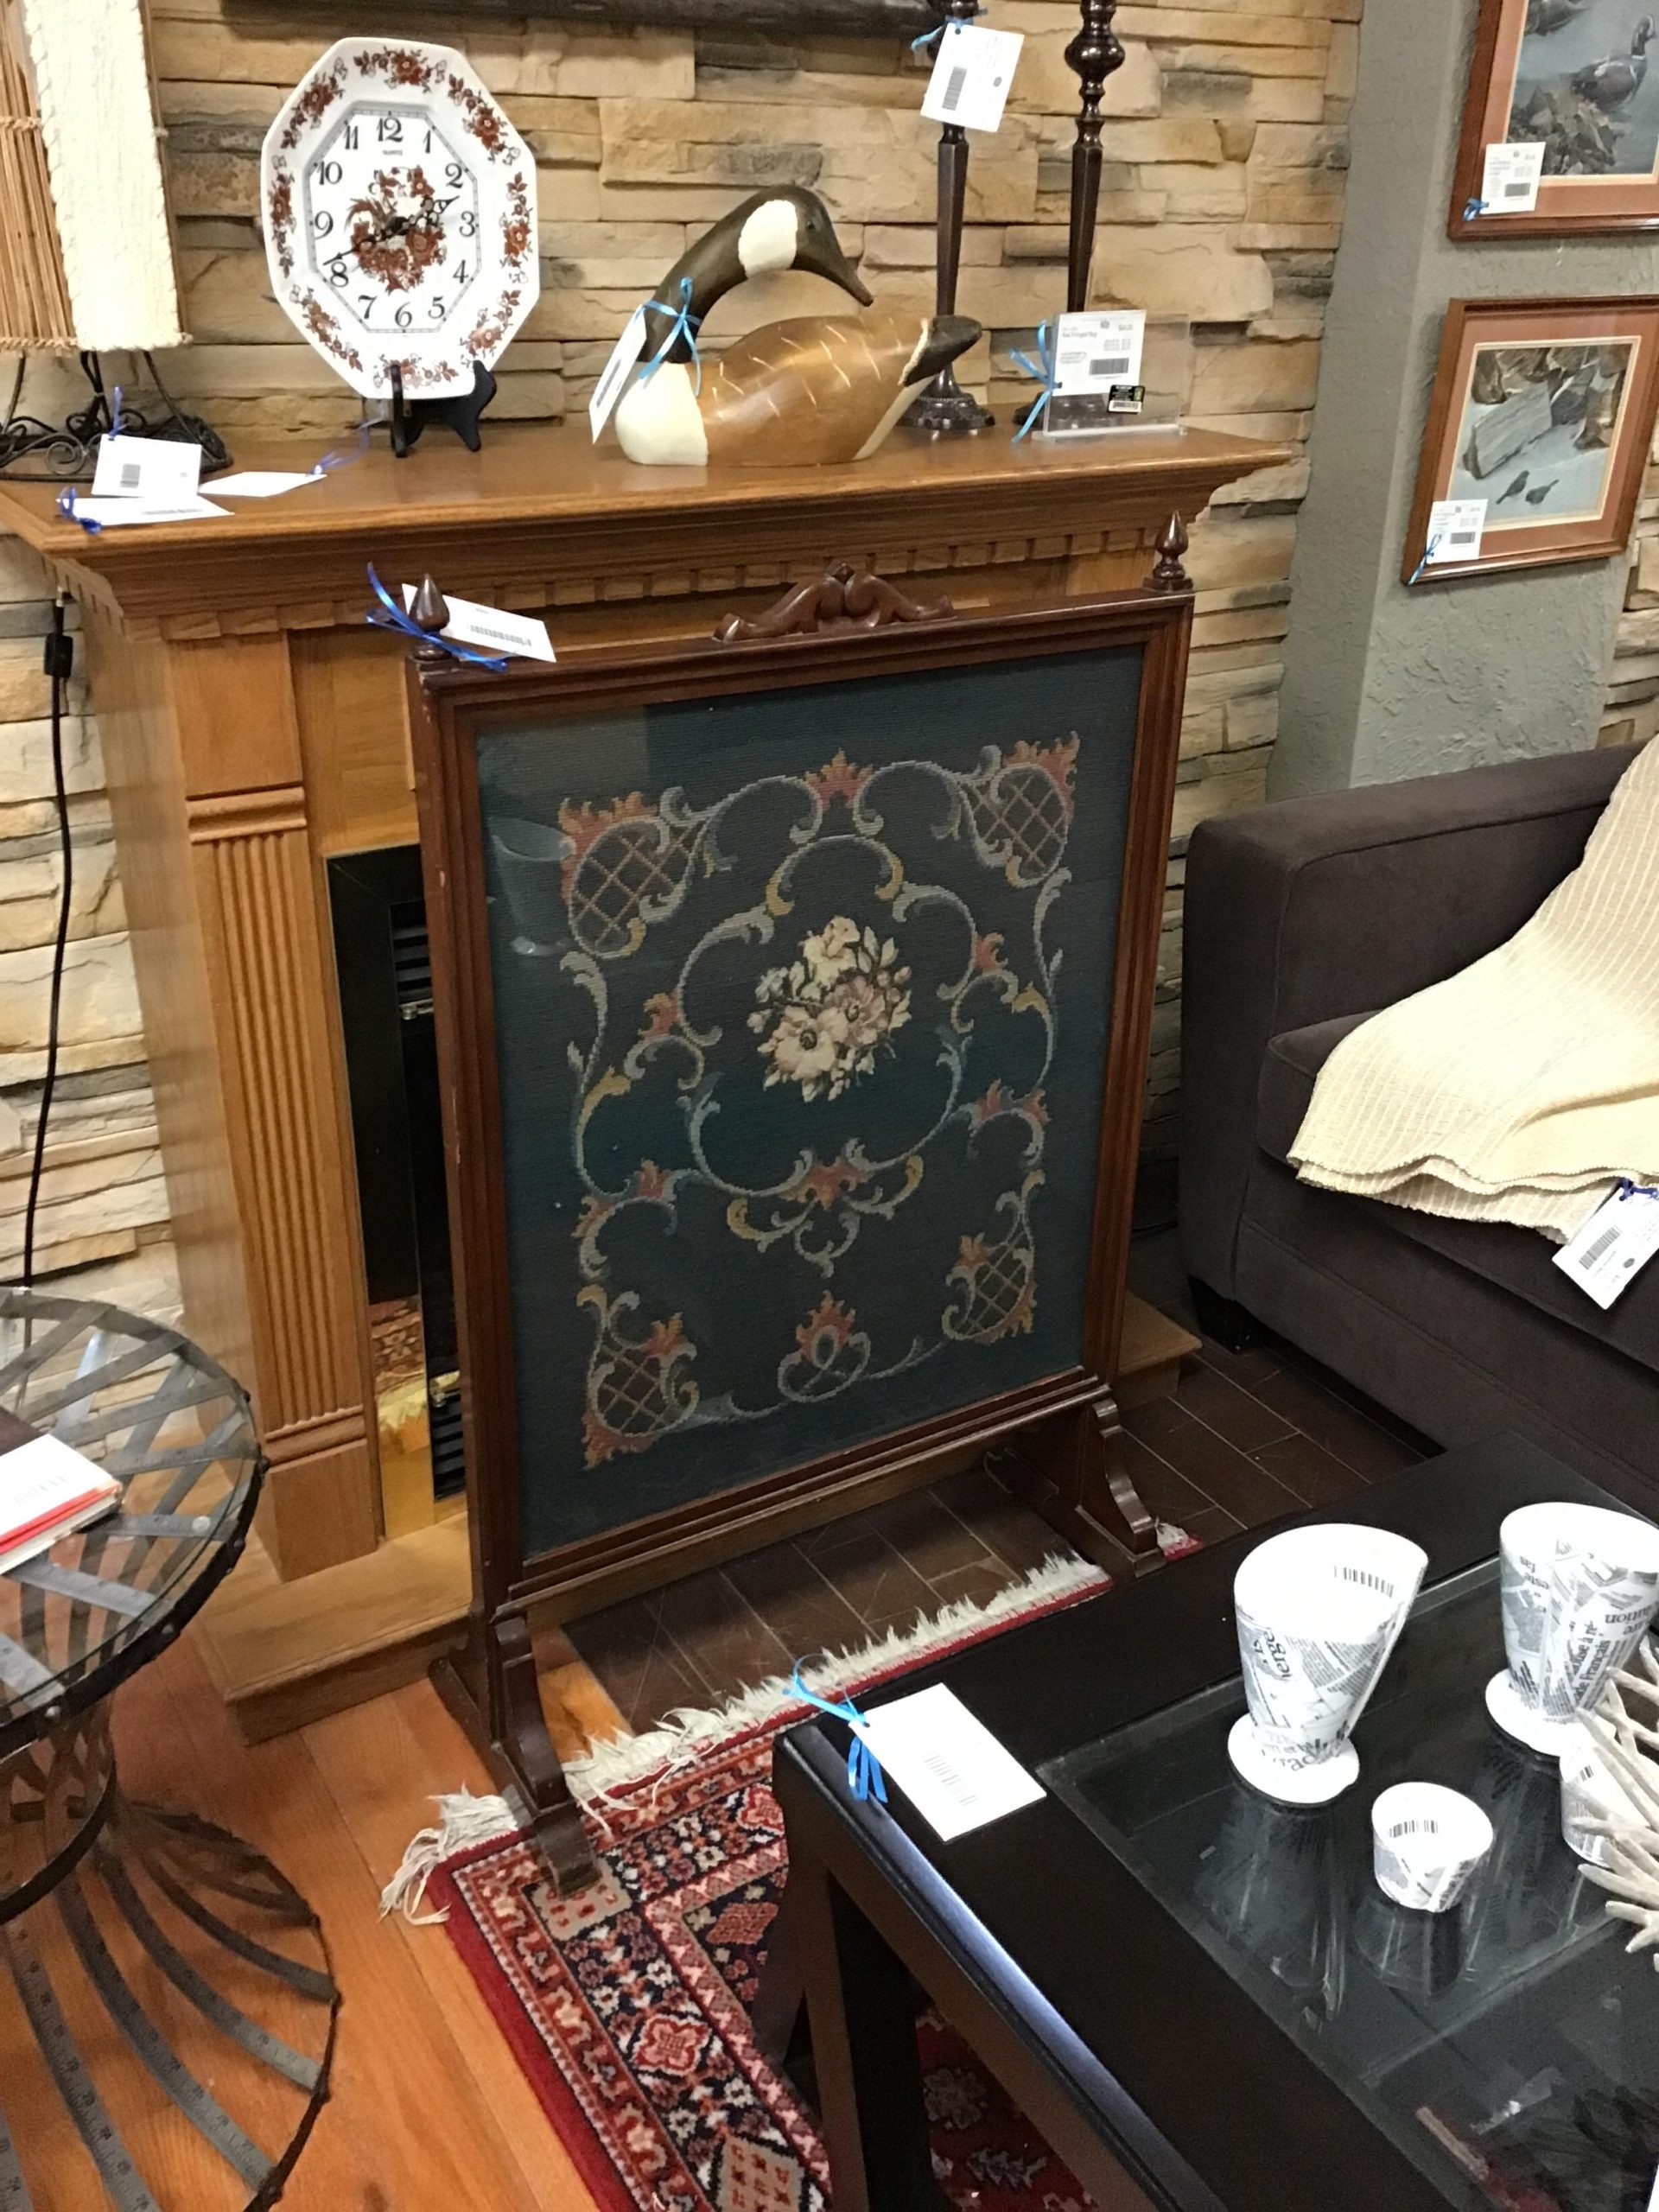 Unique! Antique Framed Tapestry Art Fireplace Screen